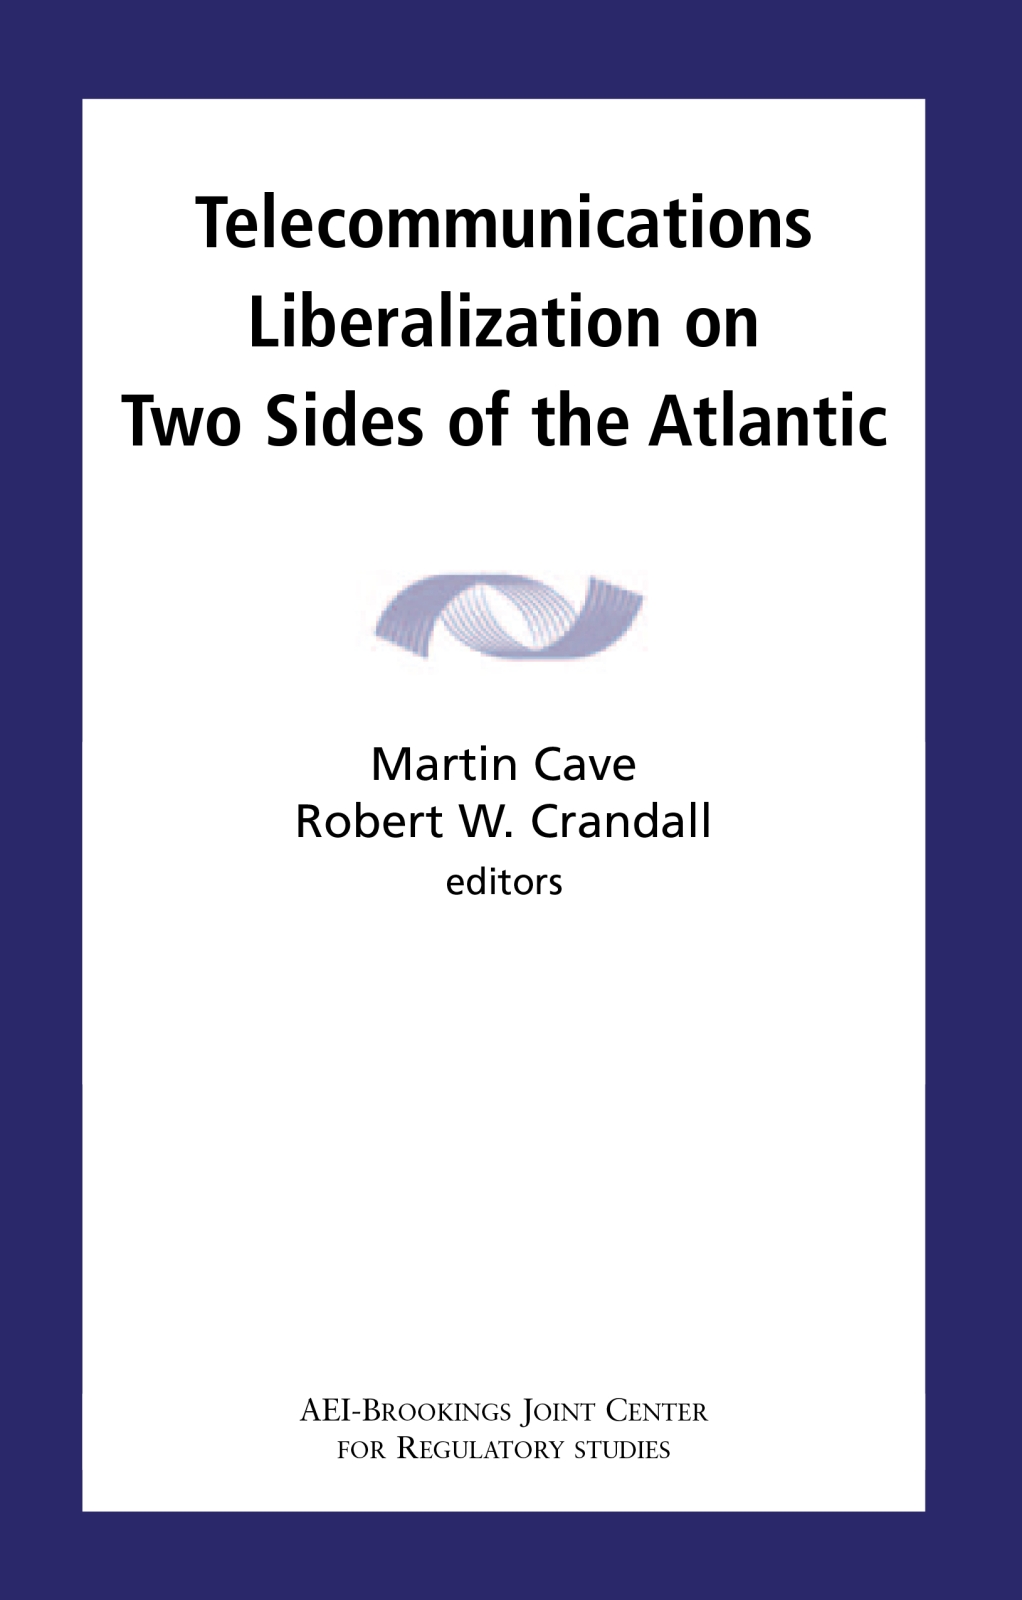 Telecommunications Liberalization on Two Sides of the Atlantic